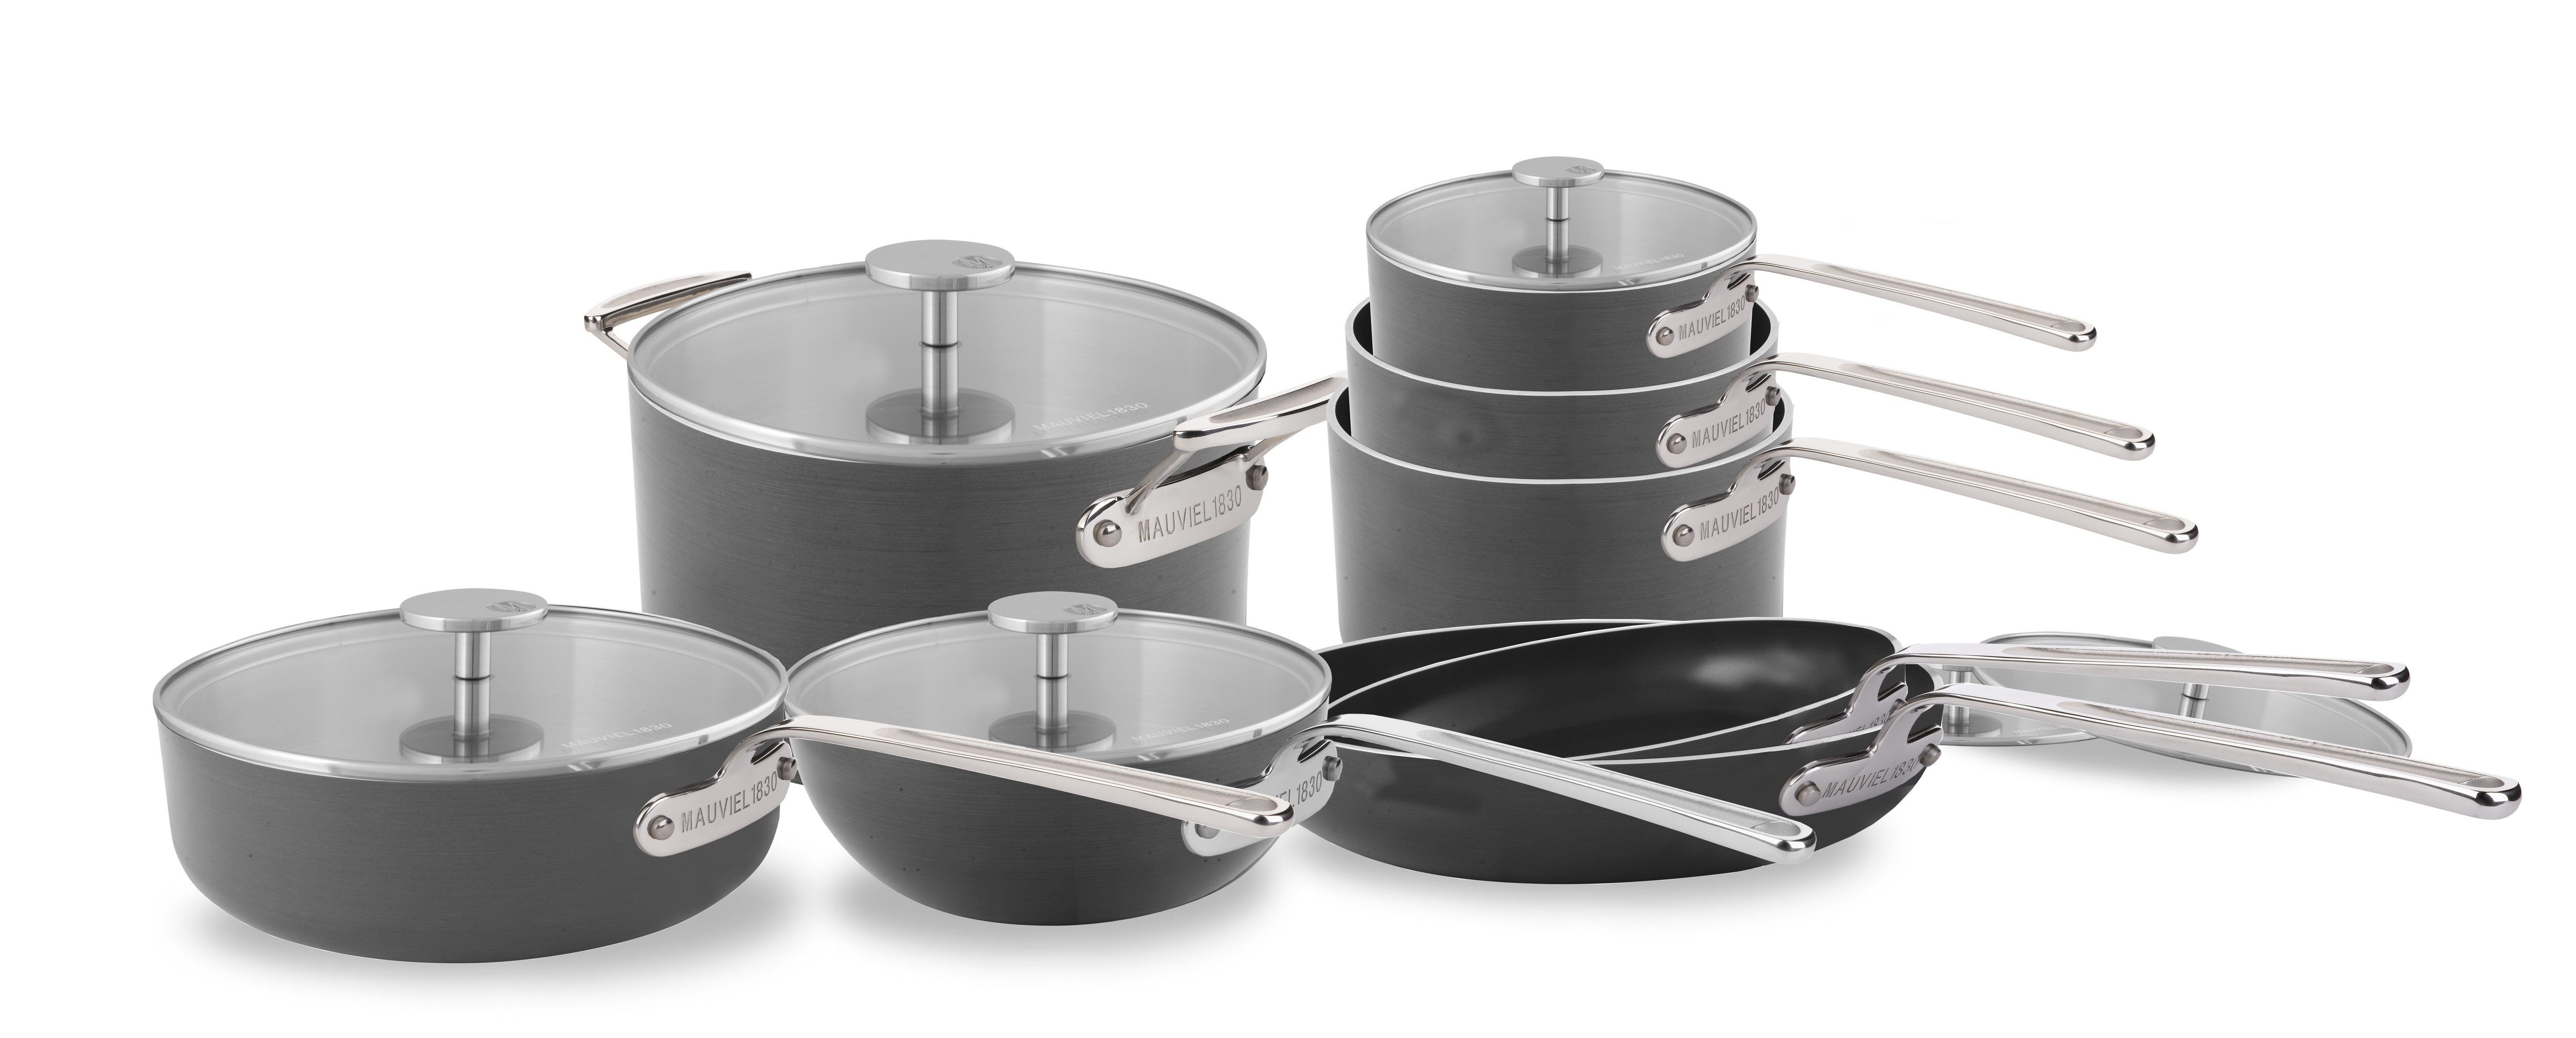 Mauviel M'STONE 360 Hard Anodized Nonstick 5-Piece Cookware Set With S, Mauviel USA